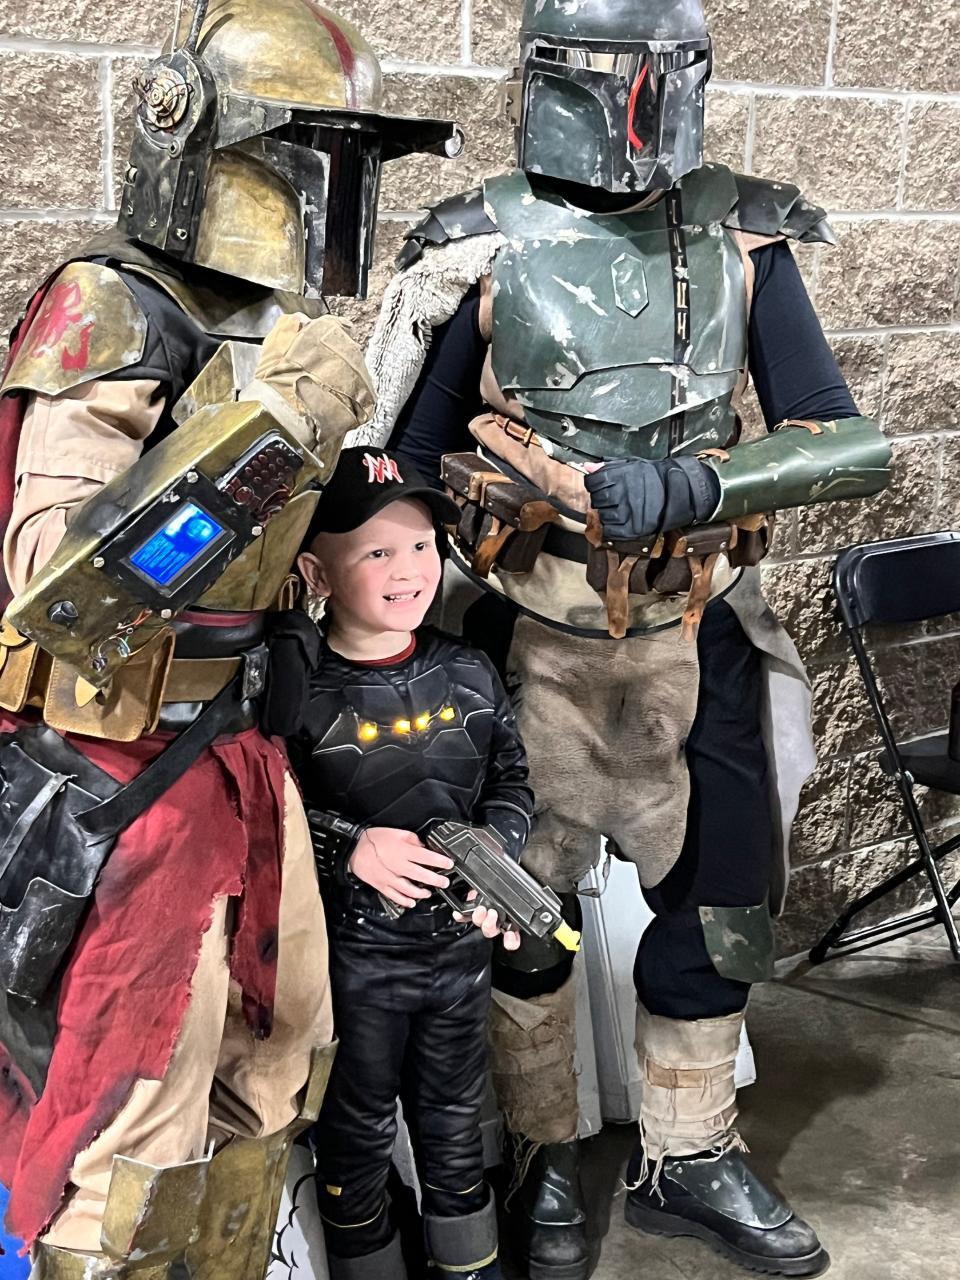 Colton Brown of Nappanee wasn't frightened by the Mandalorian Warriors from Star Wars who posed for photos Saturday at Comic Con in Elkhart.